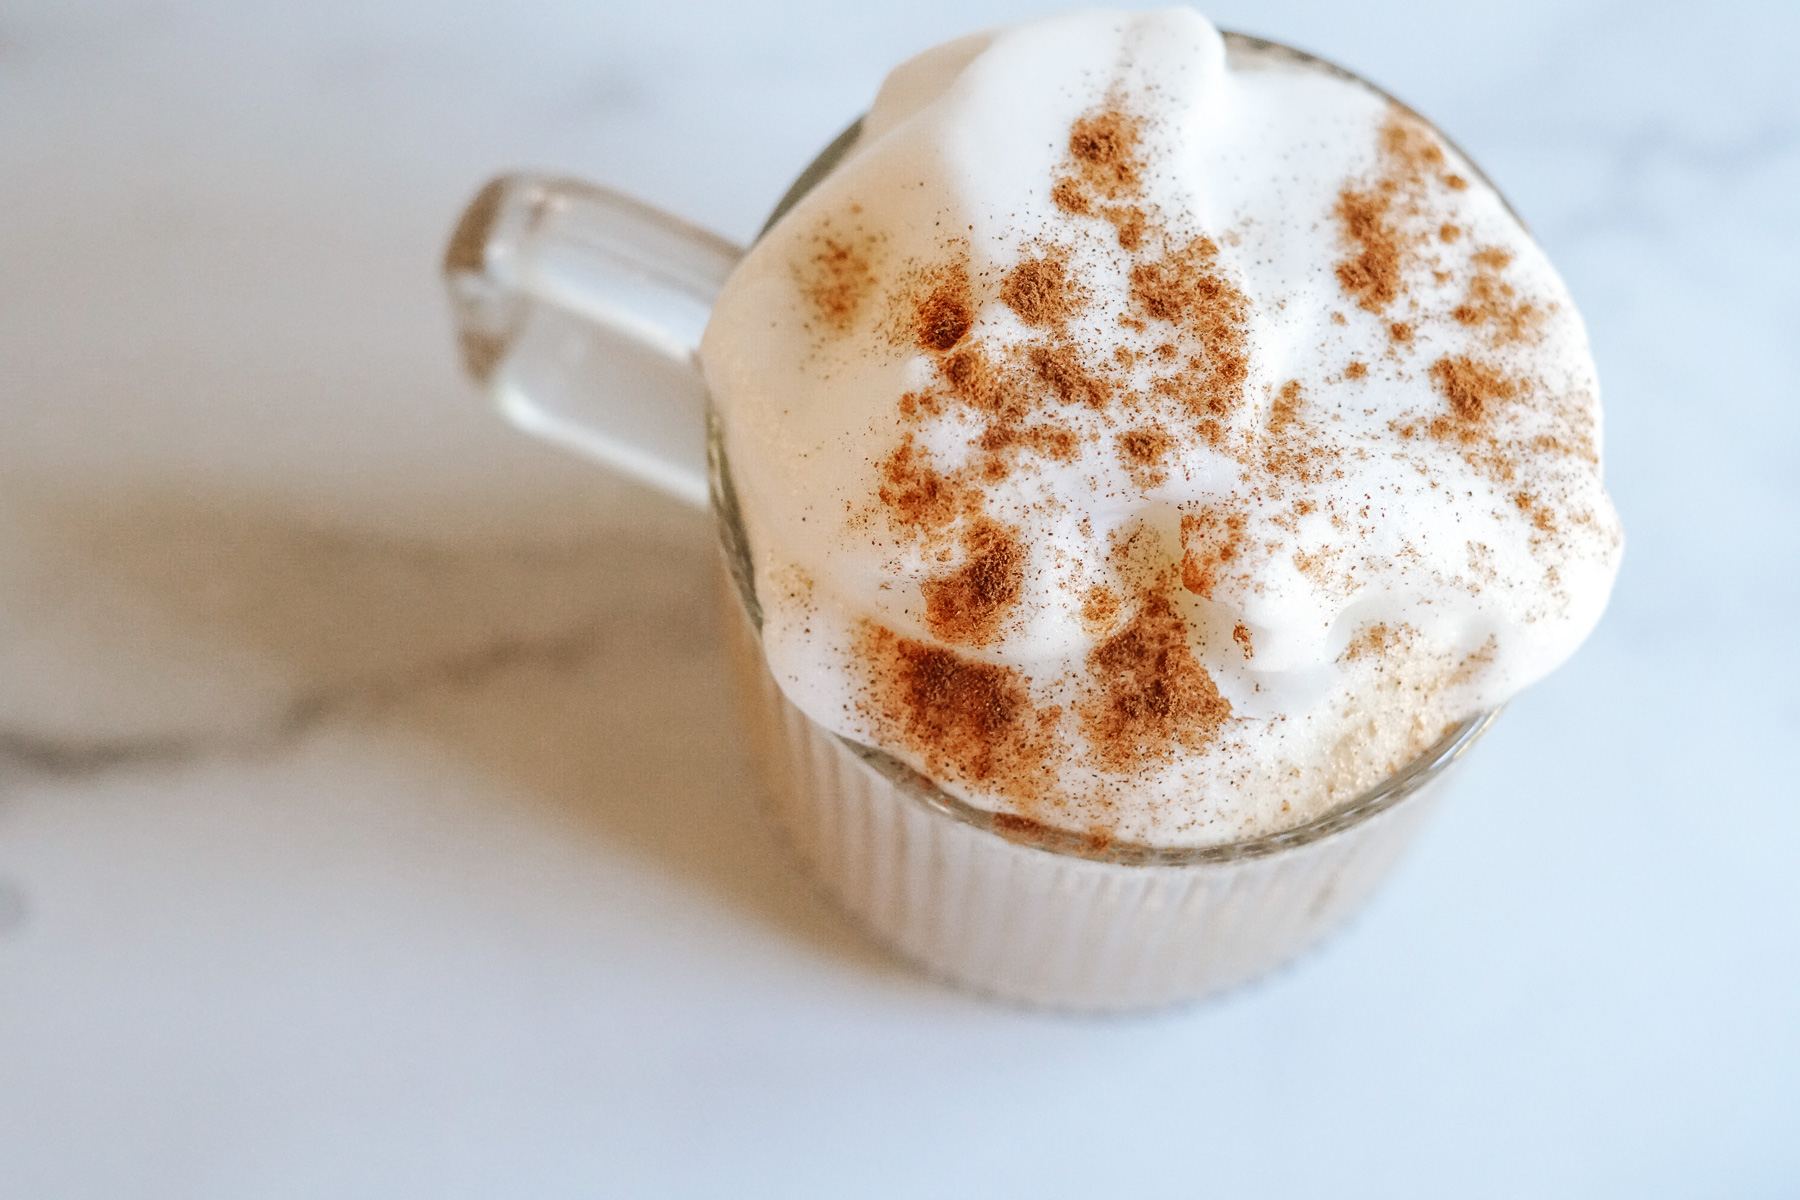 Coffee with Honey topped with Foam and Cinnamon in a Clear Glass